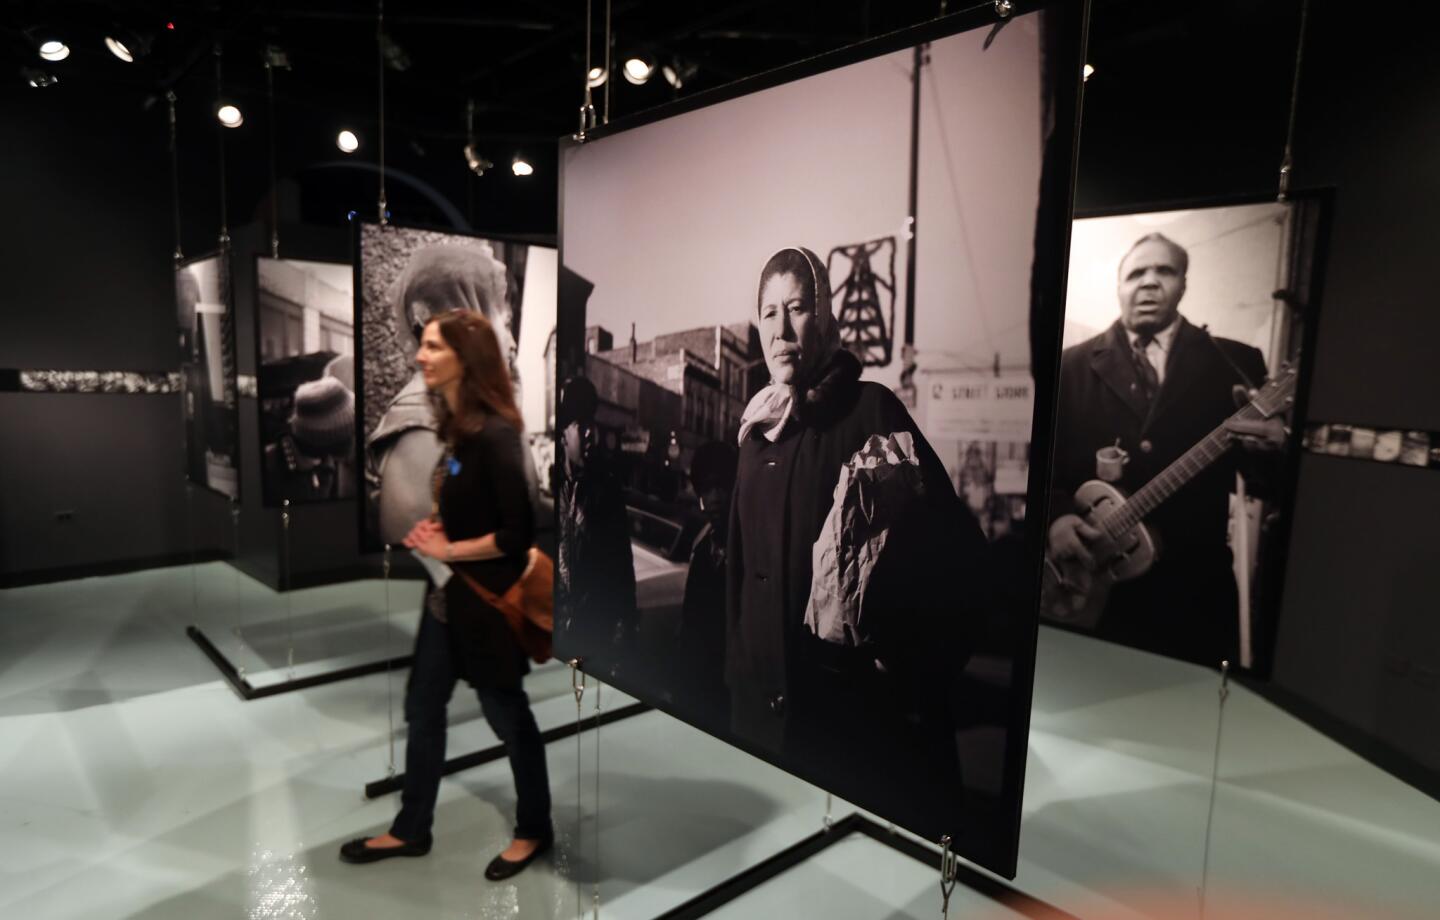 The Chicago History Museum has on display several photographs taken by amateur street photographer Vivian Maier, who became celebrated and famous posthumously. Her work has been the subject of a long-running legal dispute.